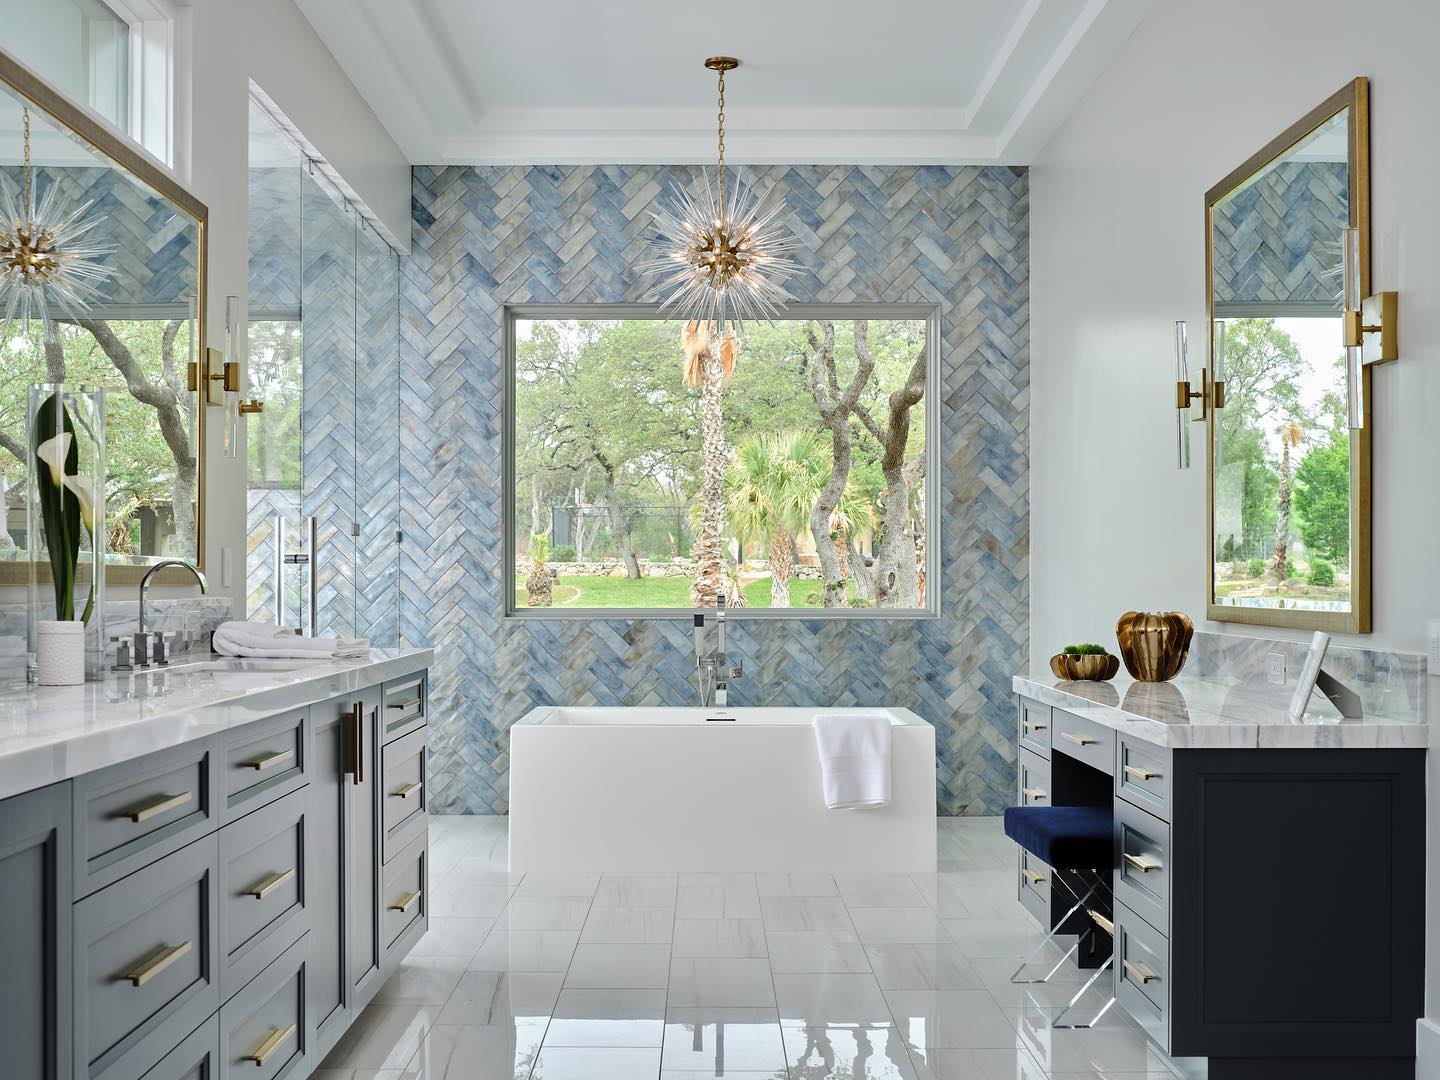 Soaking tub with blue patterned walls and chandelier.